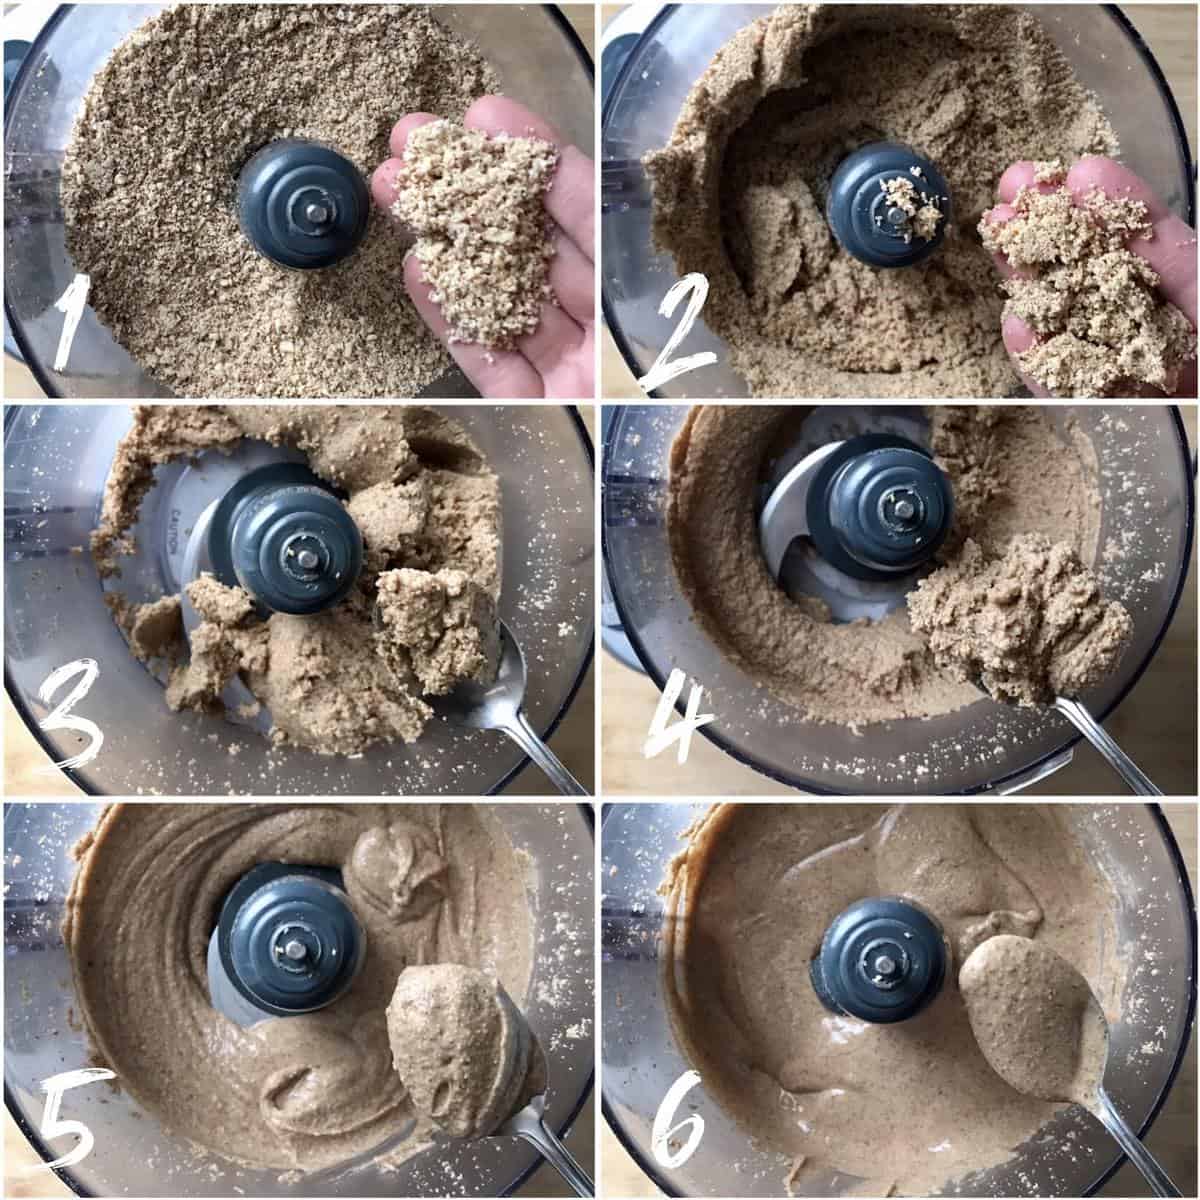 The transformation of almond butter from whole almonds to chopped up almonds to almond butter.